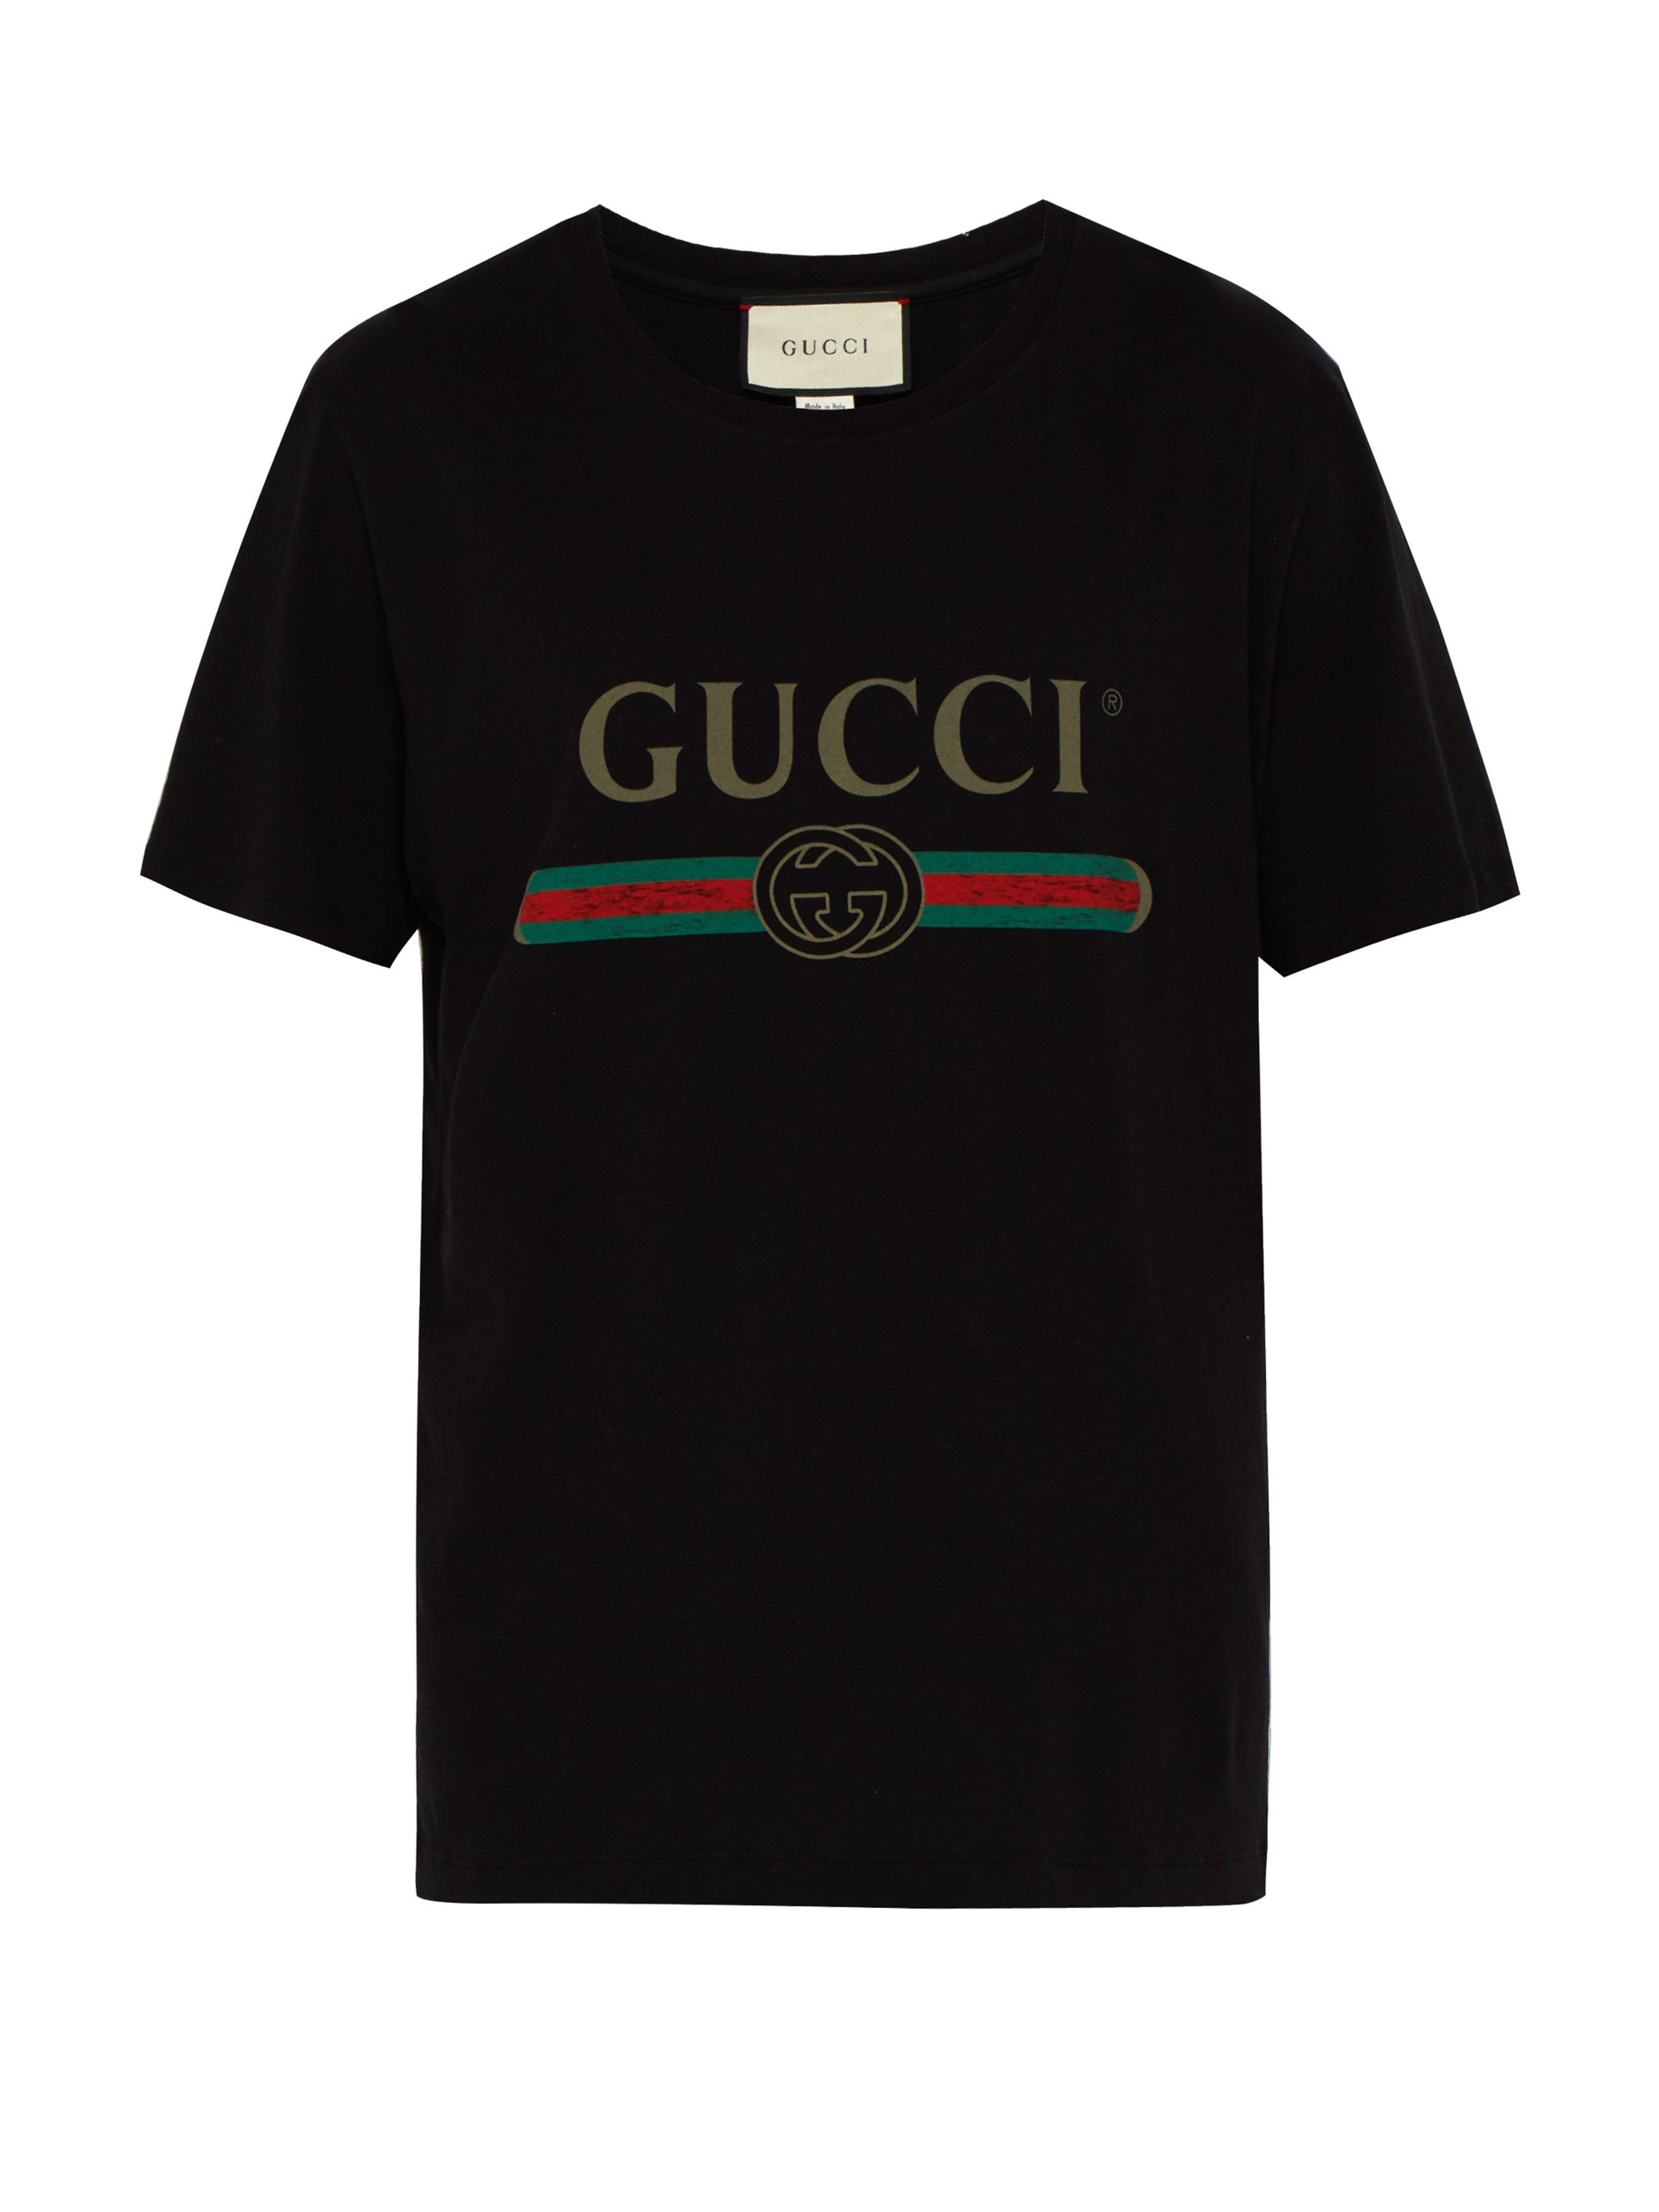 Gucci Fake Logo Print Cotton T Shirt in Black for Men - Save 24% - Lyst